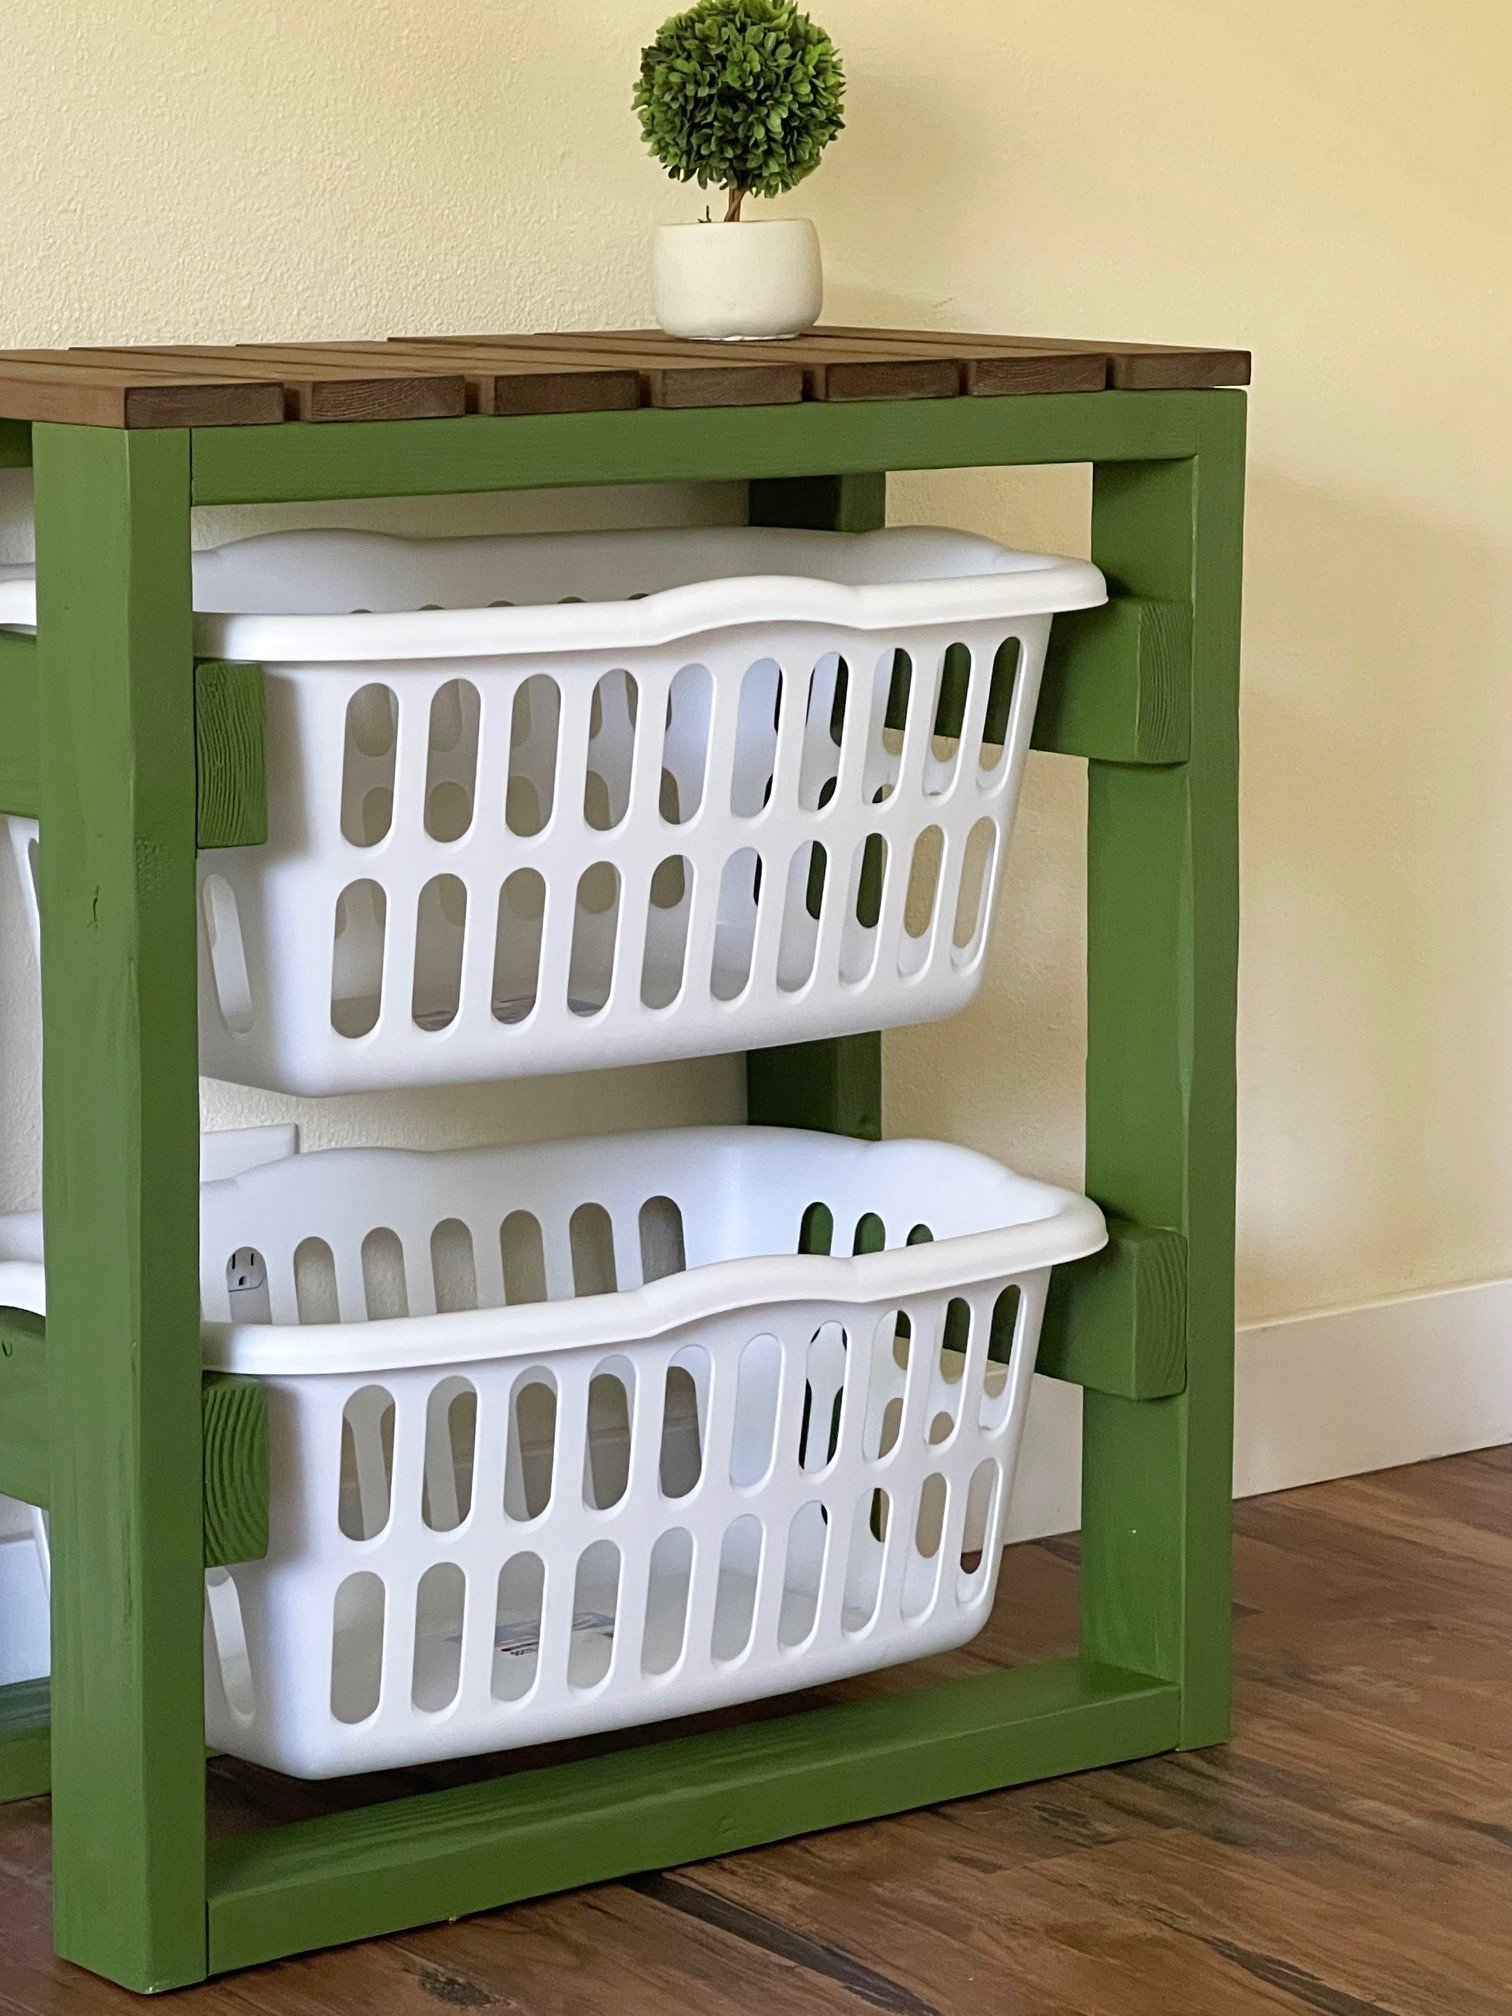 wood frame for laundry baskets